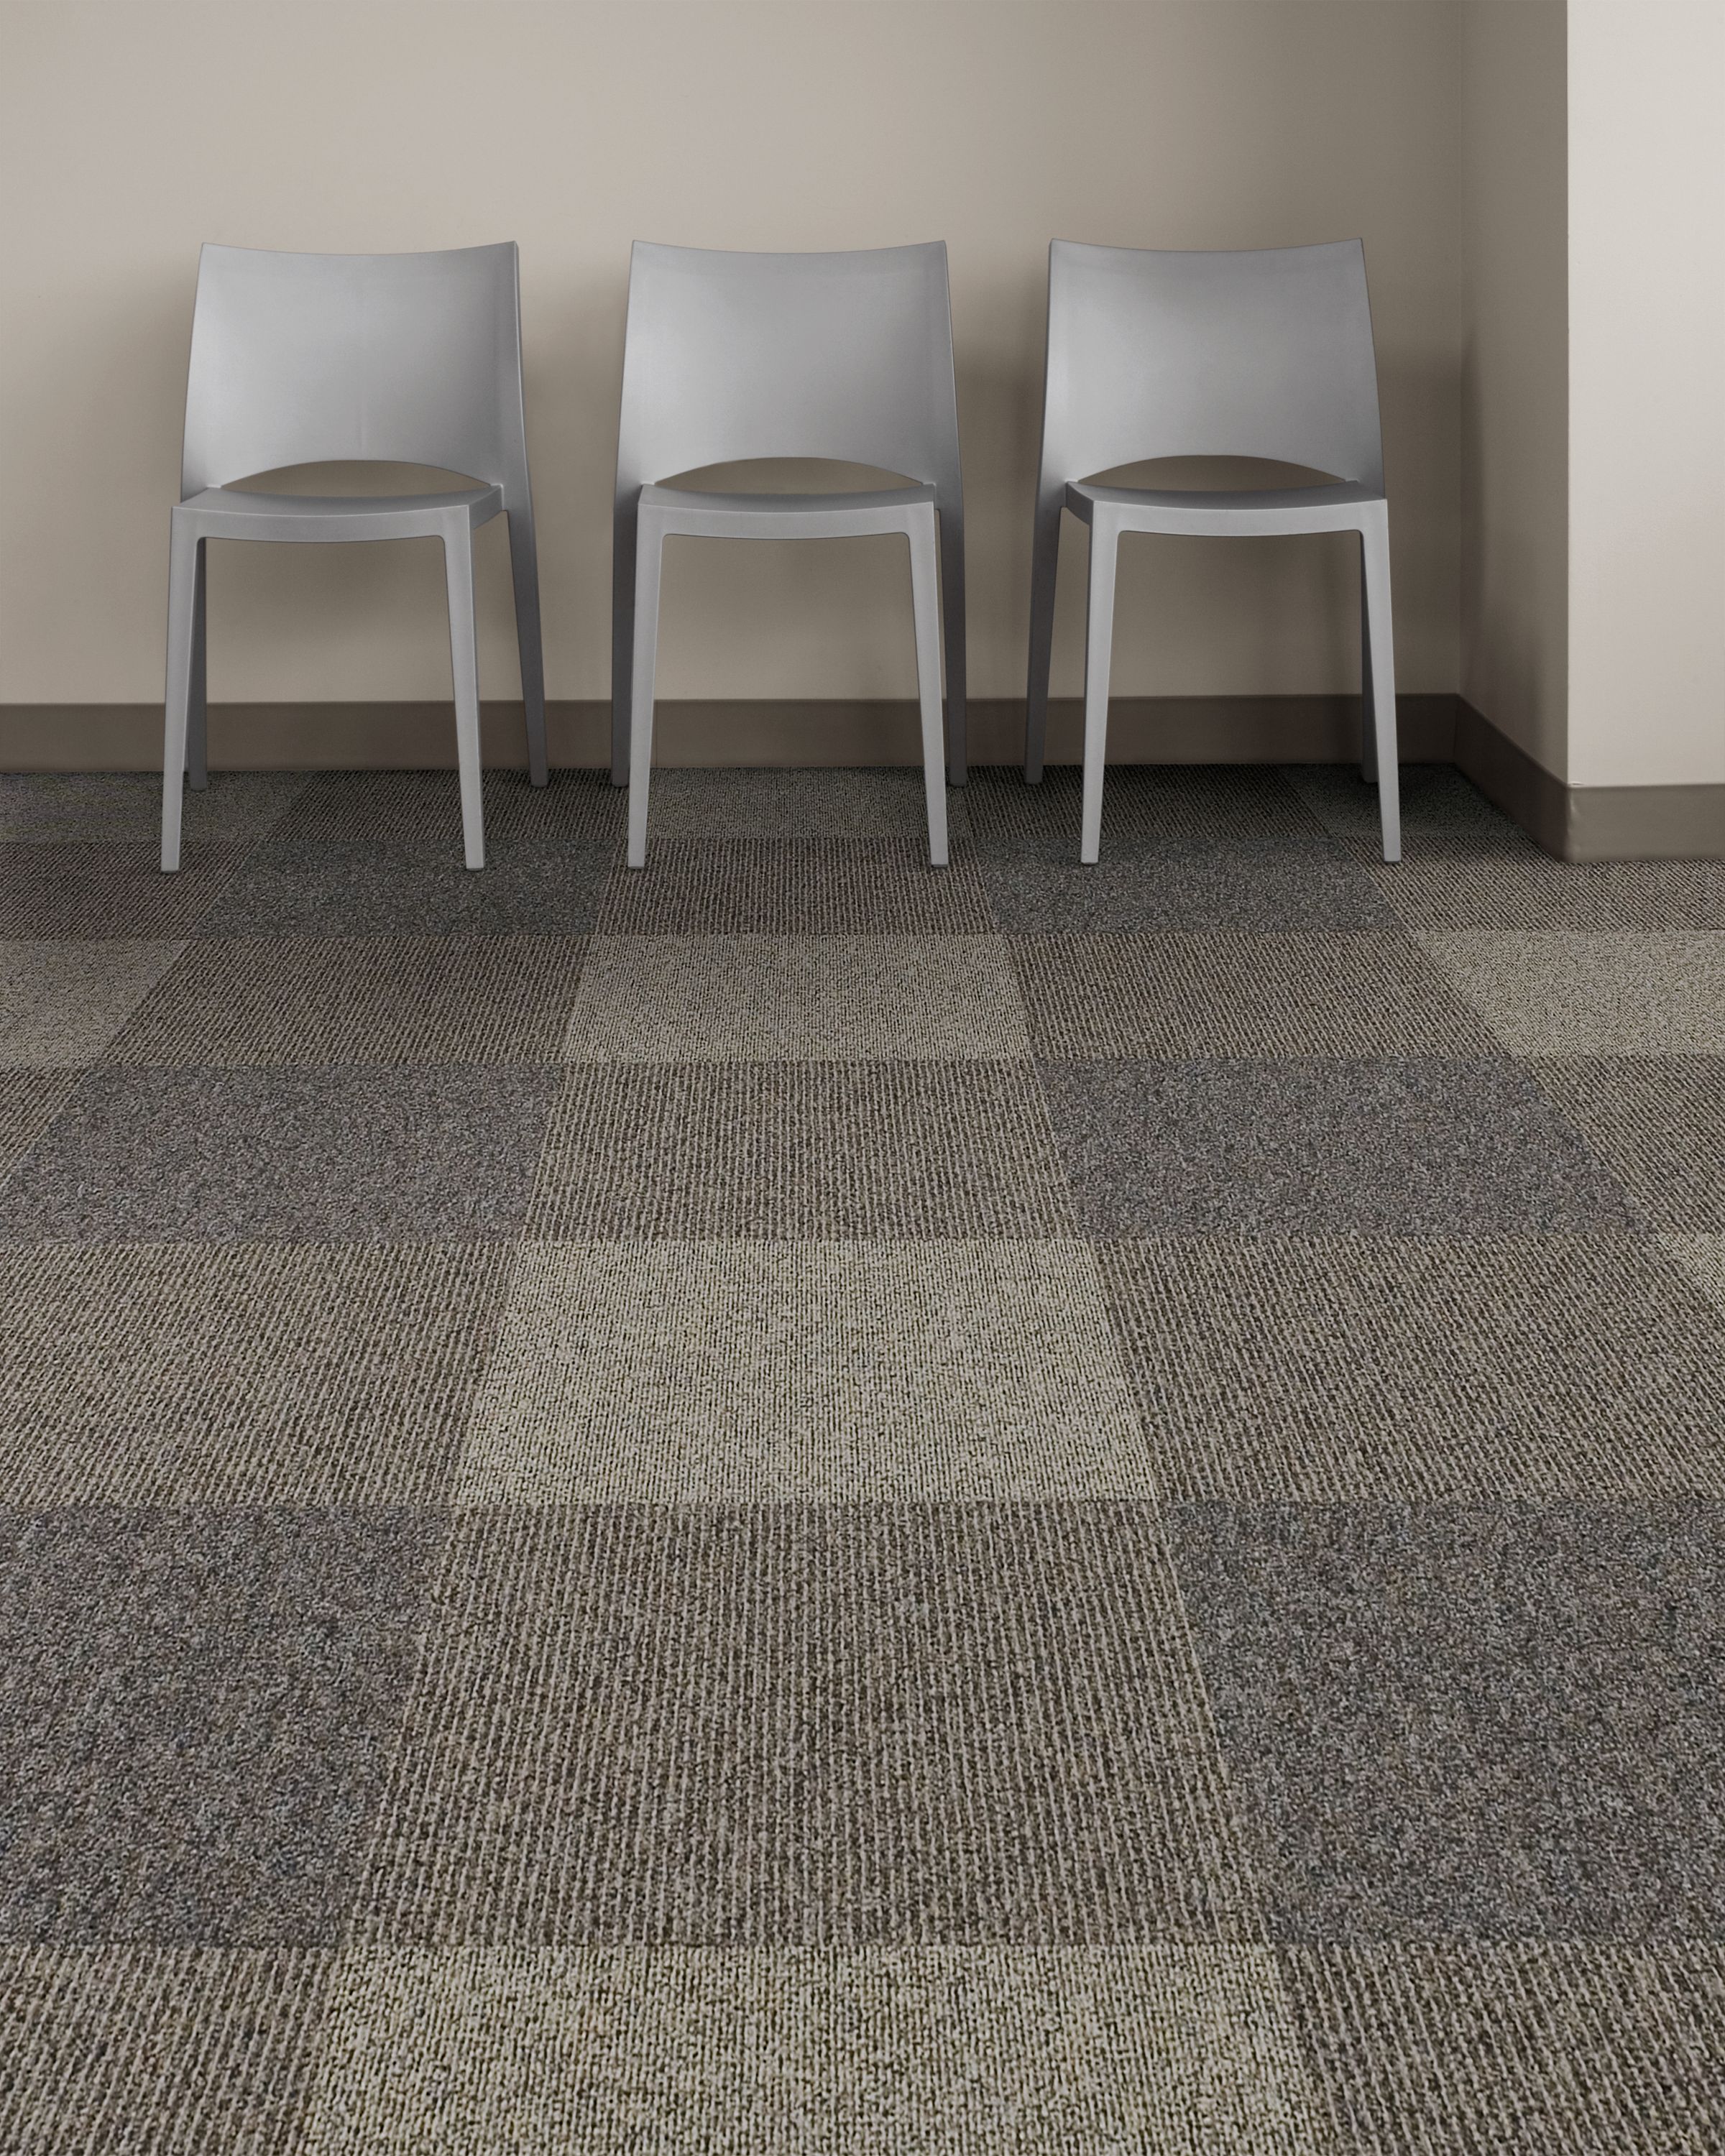 Interface Broomed, Grooved and Brushed carpet tile in room with three chairs numéro d’image 4